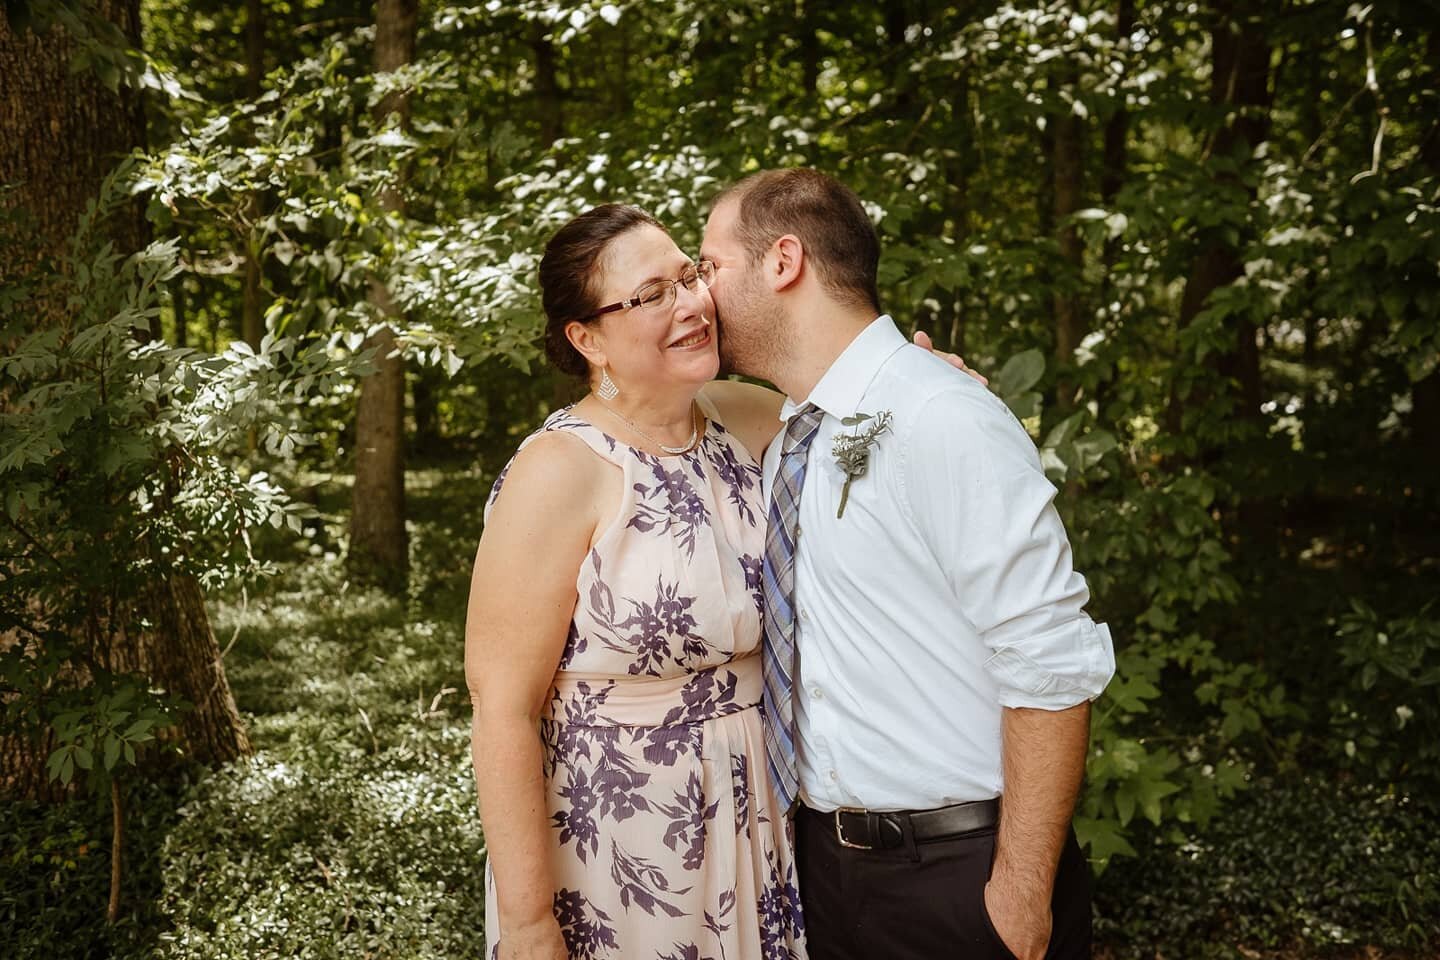 &quot;Now kiss her on the cheek!&quot; Is probably one of my favorite prompts because it can be for anyone- couples, mother &amp; son, parents of the bride... The list goes on. But the biggest reason I love this prompt- it makes everyone smile!
.
.
#